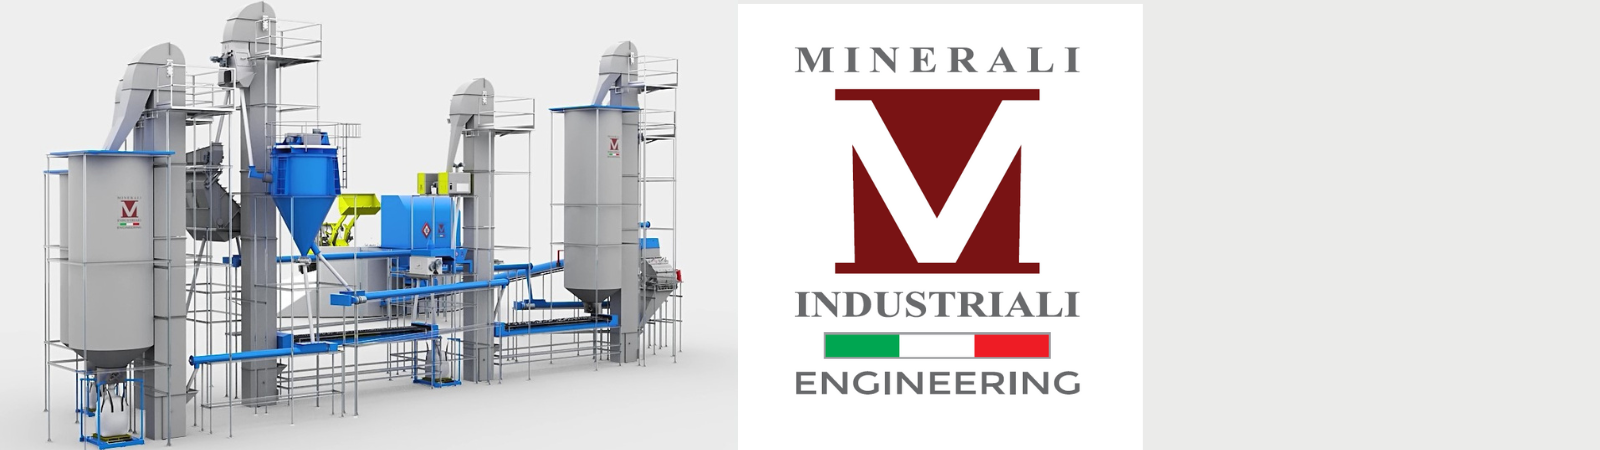 SACMI and Minerali Industriali Engineering working together for a circular economy